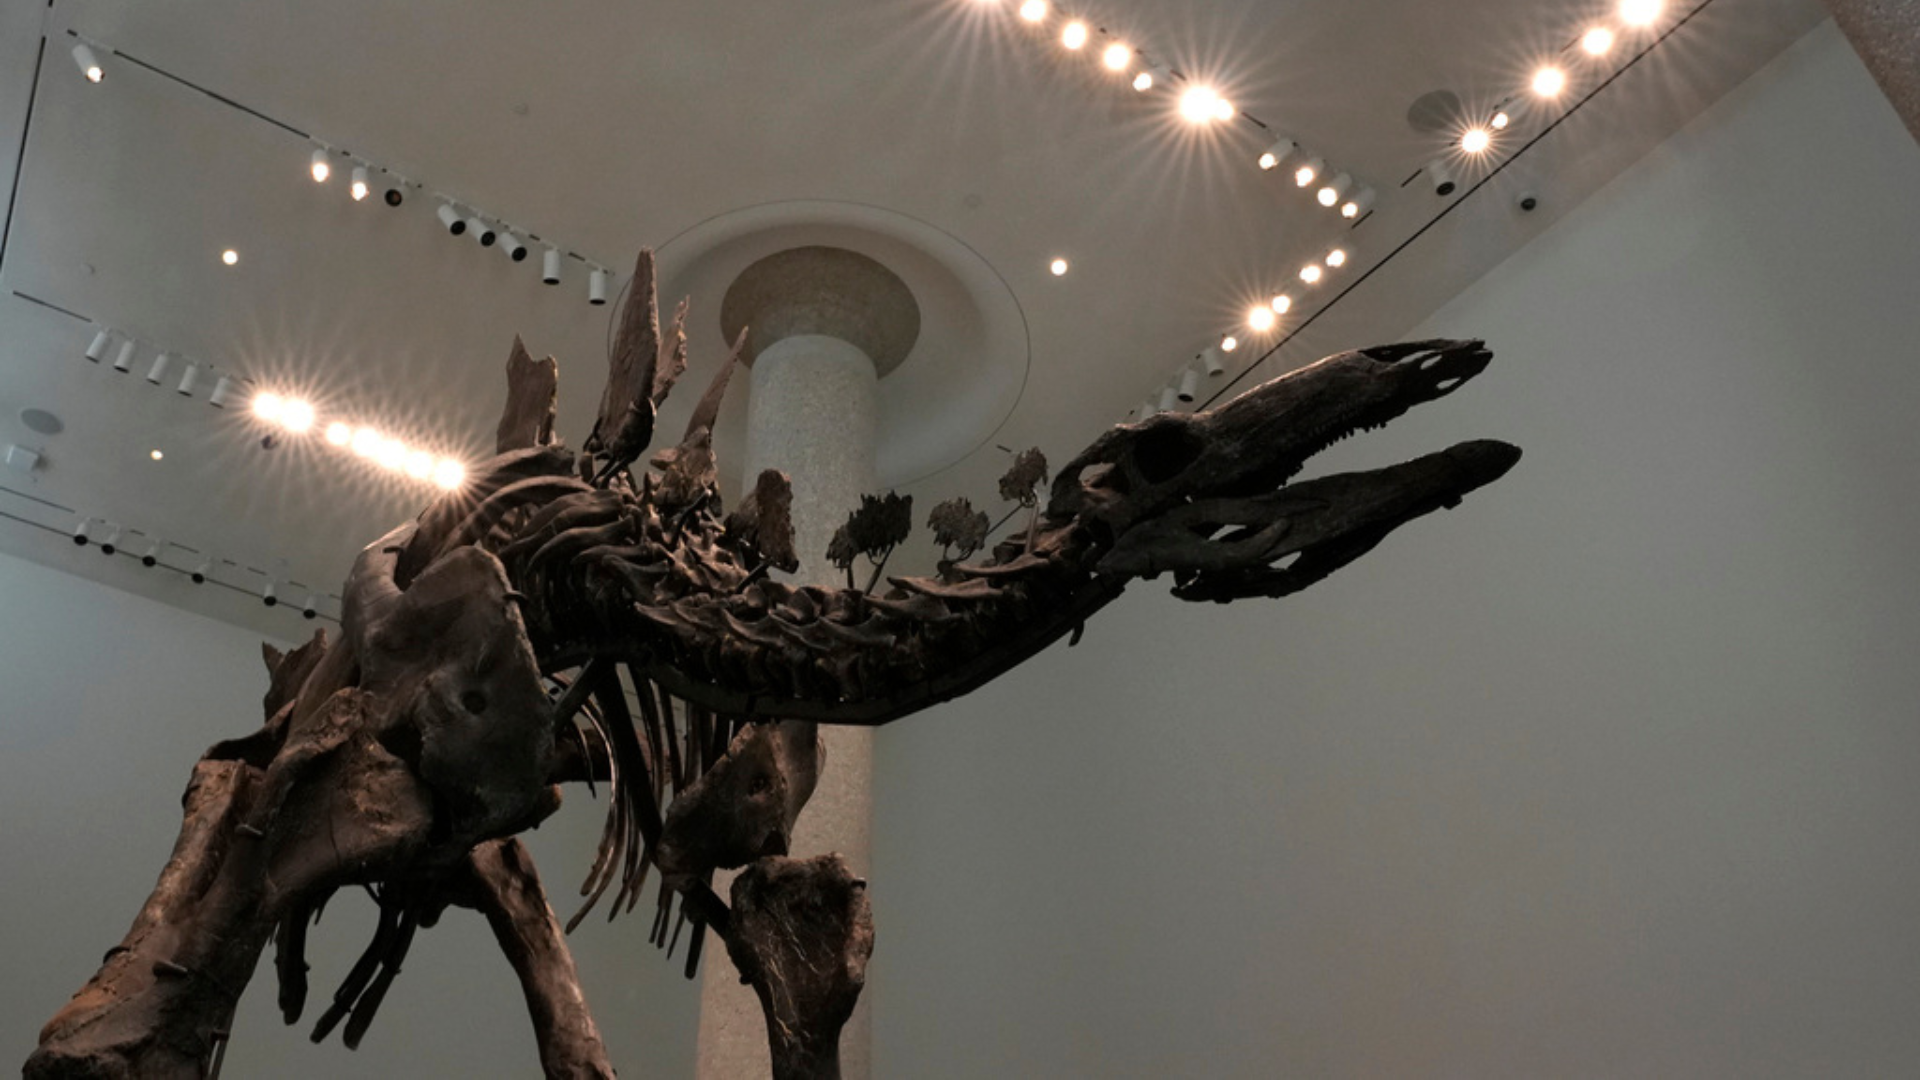 Part of a stegosaurus skeleton is displayed at Sotheby's New York